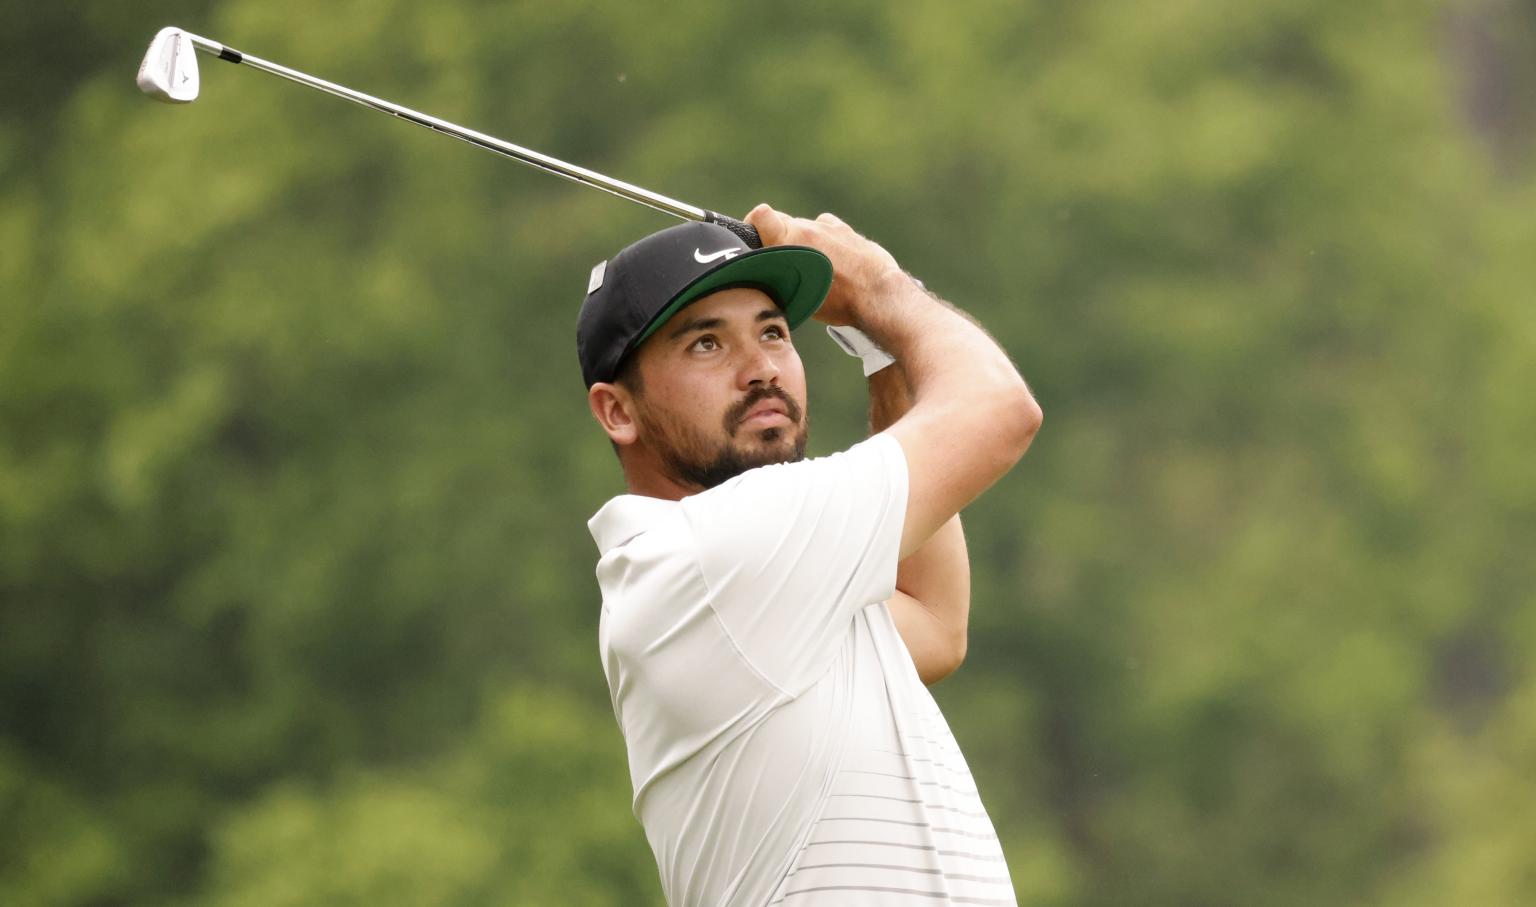 Former World No. 1 Jason Day SPOTTED using a new putter GolfMagic